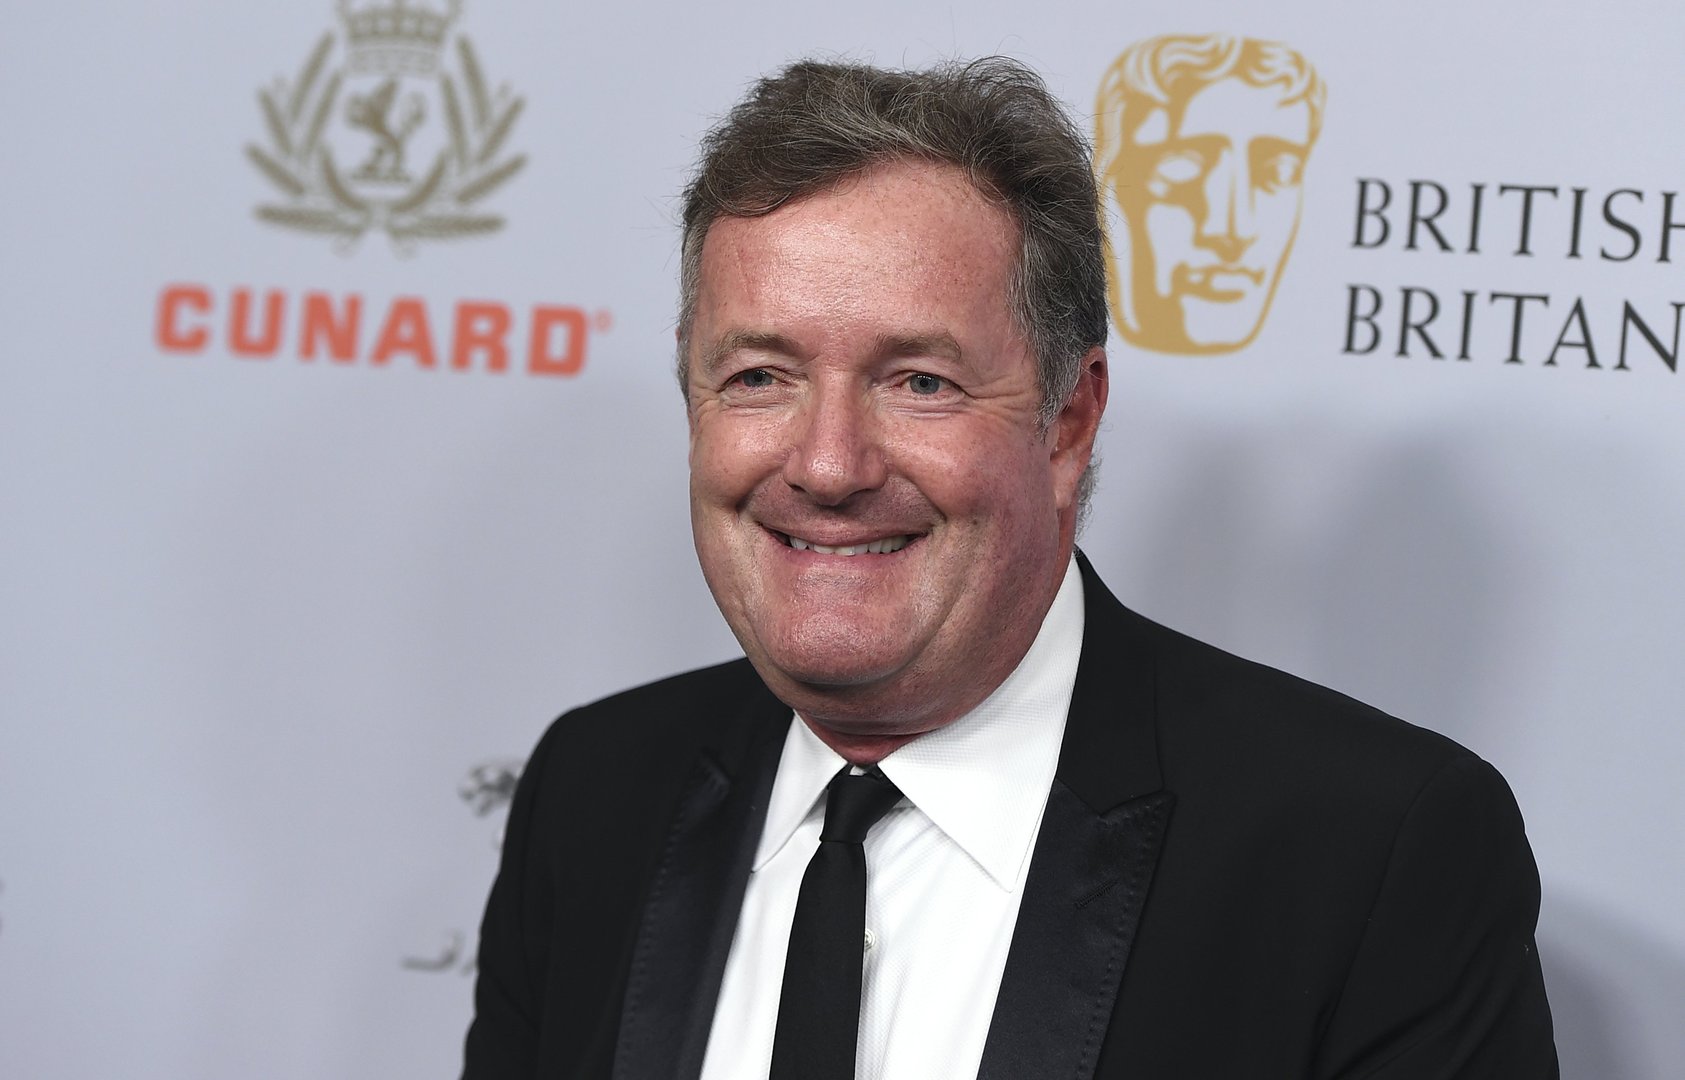 Piers Morgan knew what going on, Harry says